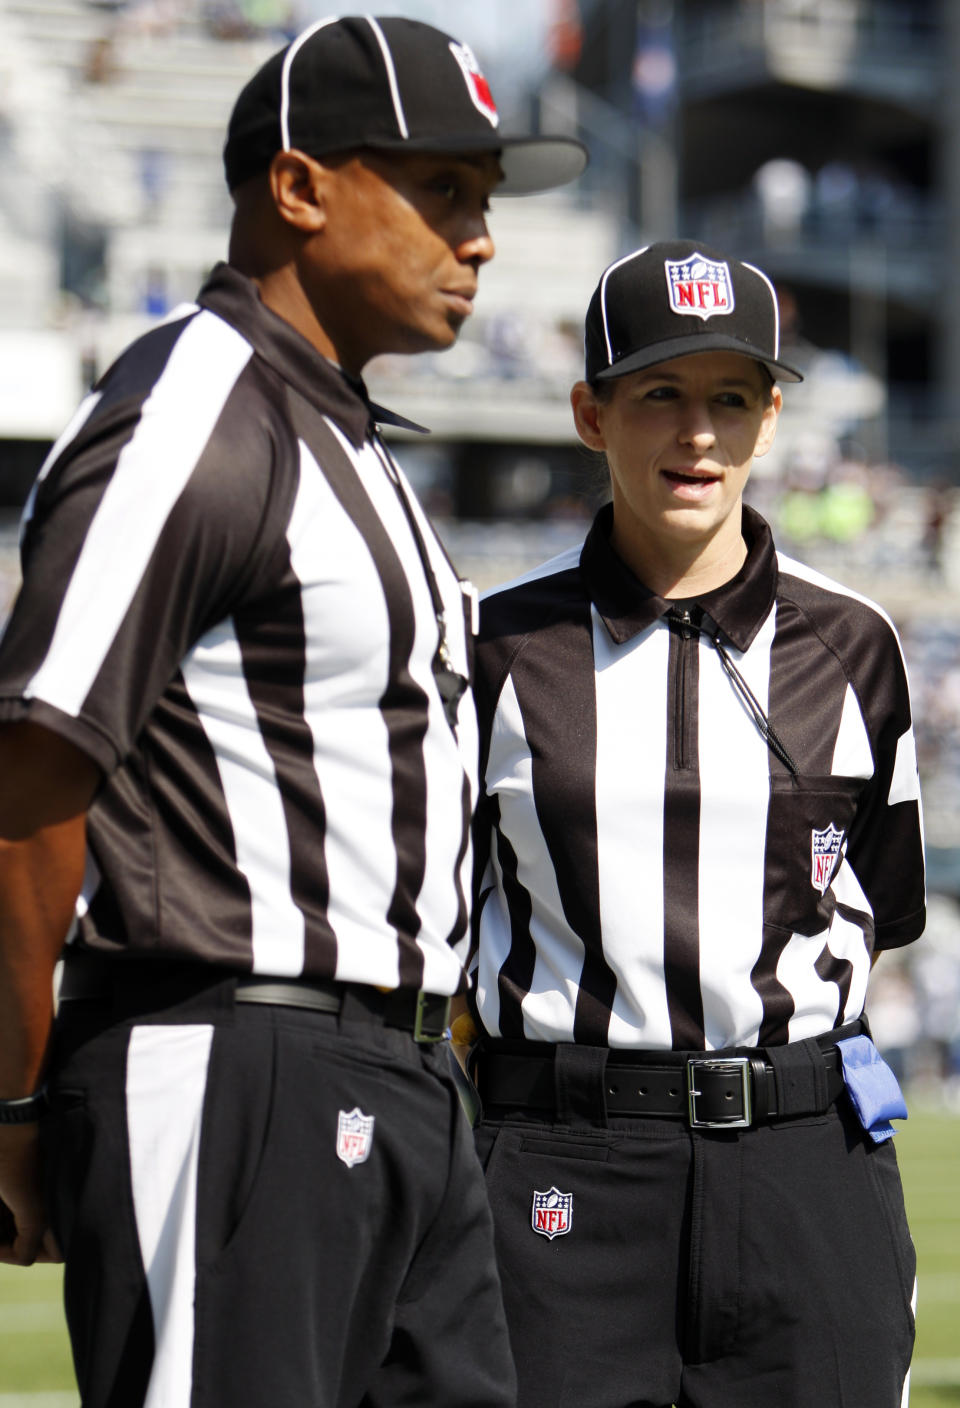 Official Shannon Eastin, right, talks with another official before an NFL football game between the Dallas Cowboys and Seattle Seahawks, Sunday, Sept. 16, 2012, in Seattle. (AP Photo/Kevin P. Casey)